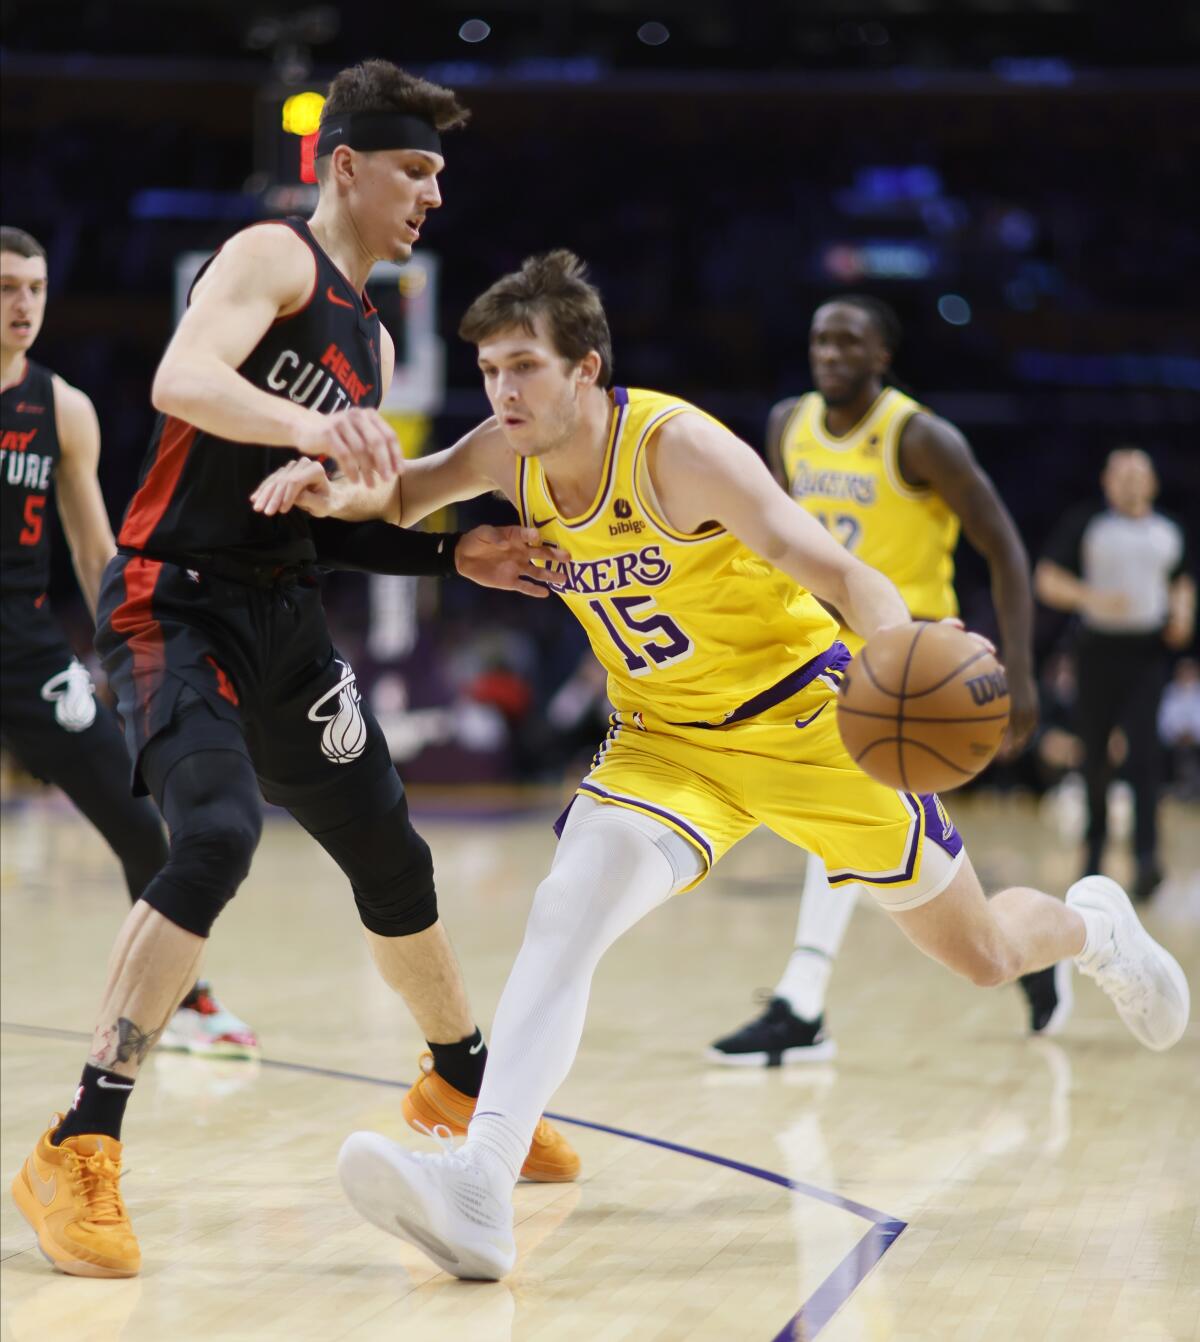 The Lakers' Austin Reaves drives the lane against the Heat's Tyler Herro during Wednesday's game.